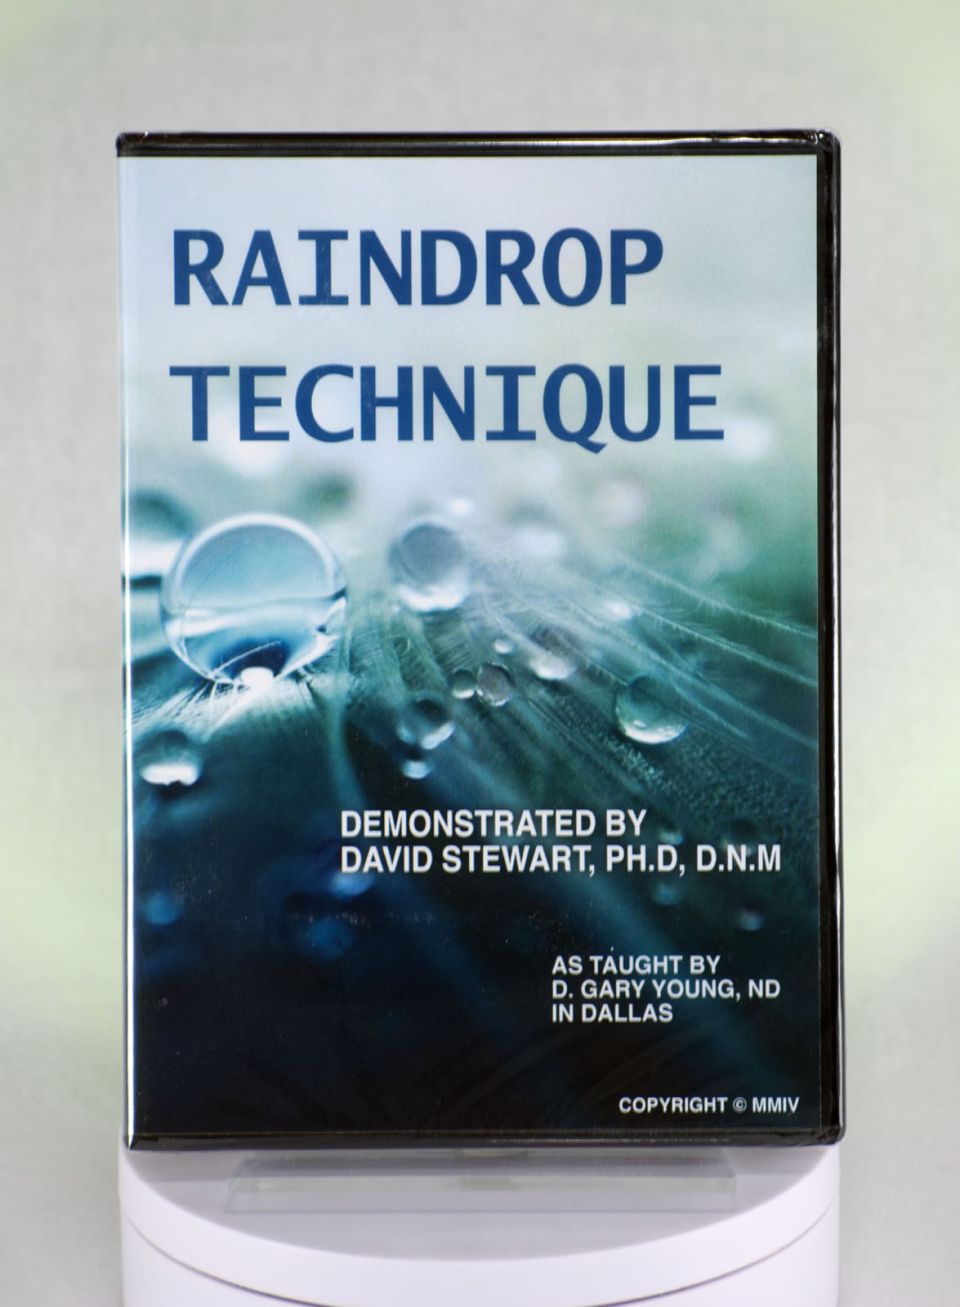 Raindrop Technique as taught by Dr. Gary Young in Dallas in 2000 and demonstrated by Dr. David Stewart.